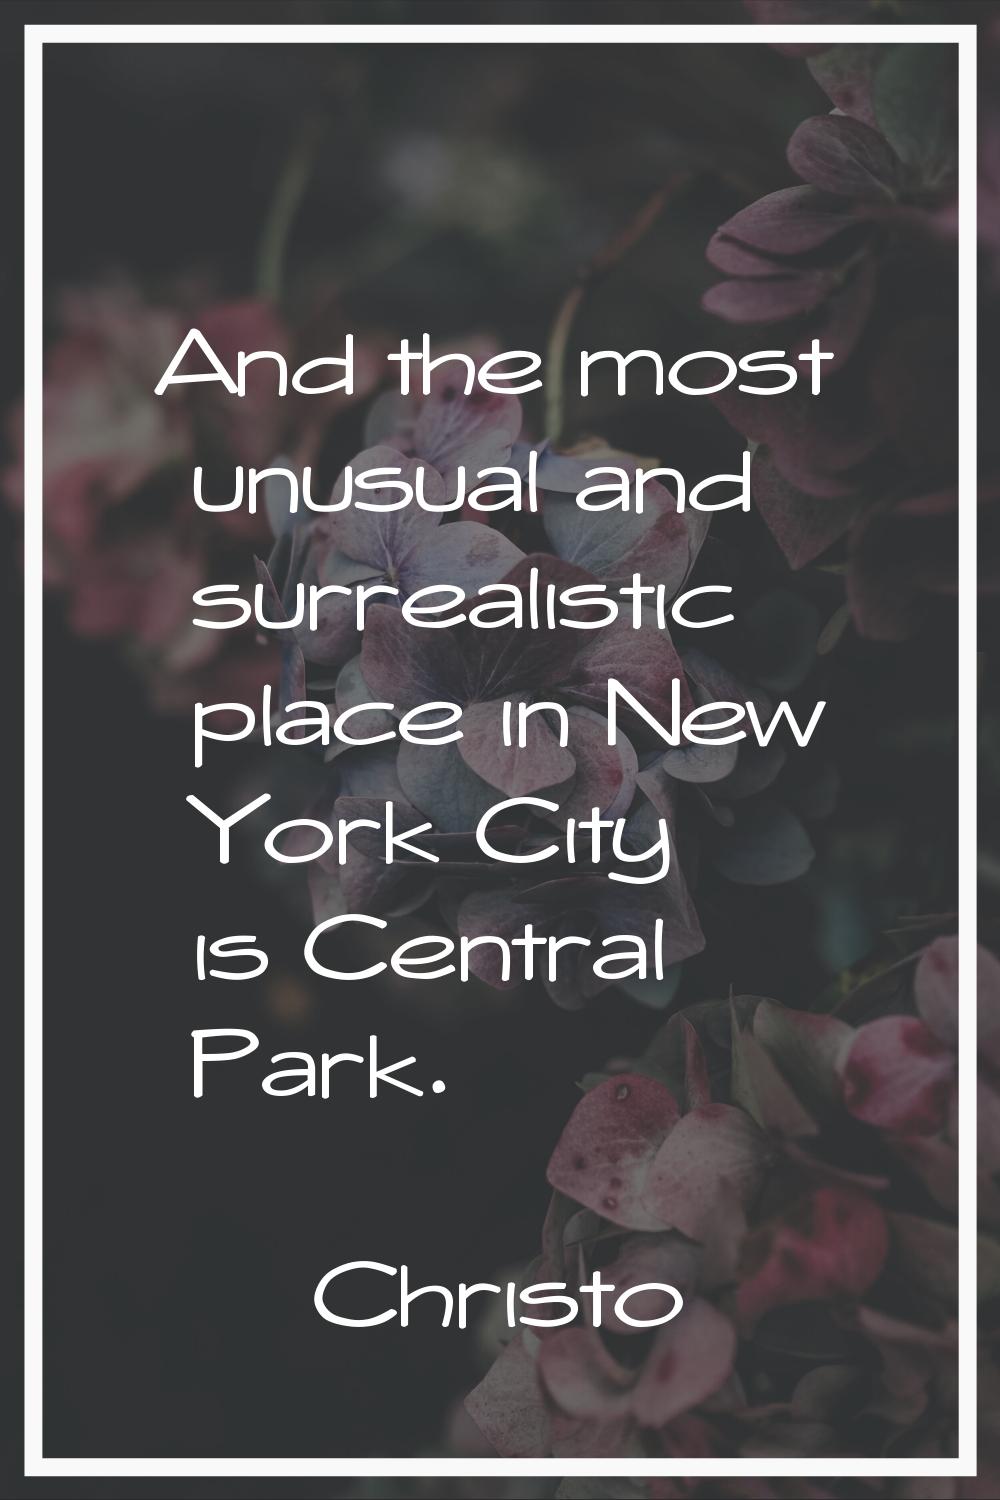 And the most unusual and surrealistic place in New York City is Central Park.